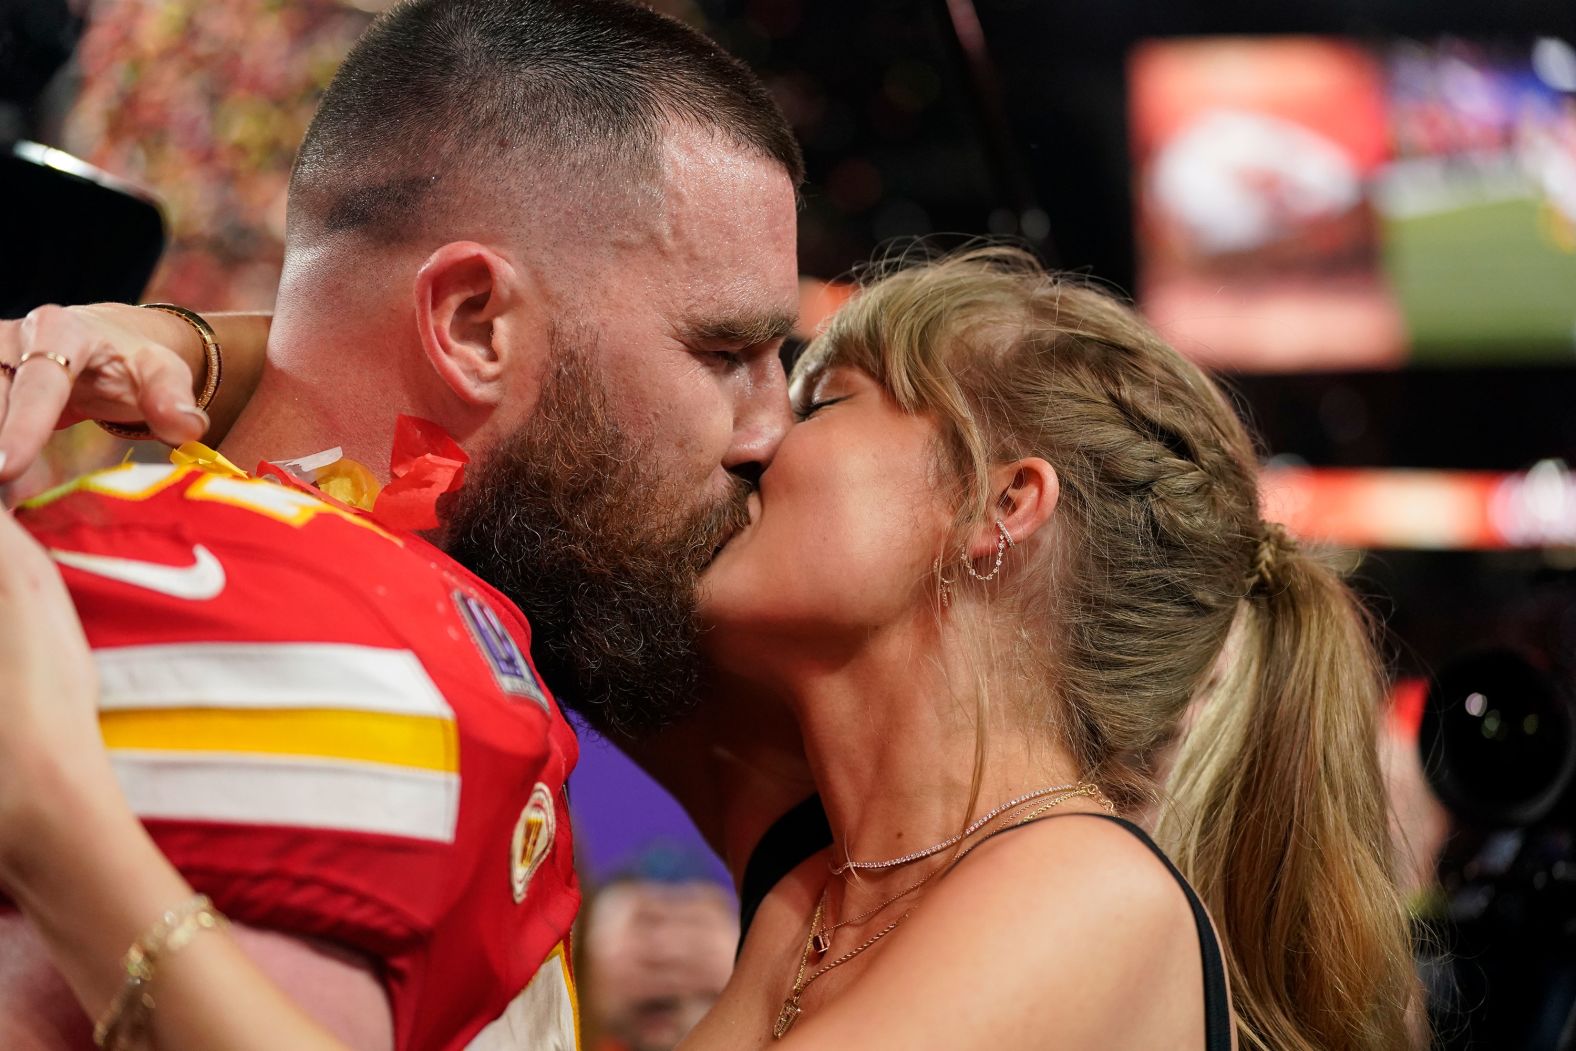 Kansas City Chiefs tight end Travis Kelce kisses his girlfriend, singer Taylor Swift, after the Chiefs won <a href="index.php?page=&url=http%3A%2F%2Fwww.cnn.com%2F2024%2F02%2F11%2Fsport%2Fgallery%2Fbest-photos-super-bowl-lviii%2Findex.html" target="_blank">Super Bowl LVIII</a> on Sunday, February 11. The Chiefs are the first team to win consecutive Super Bowls since New England in 2005.